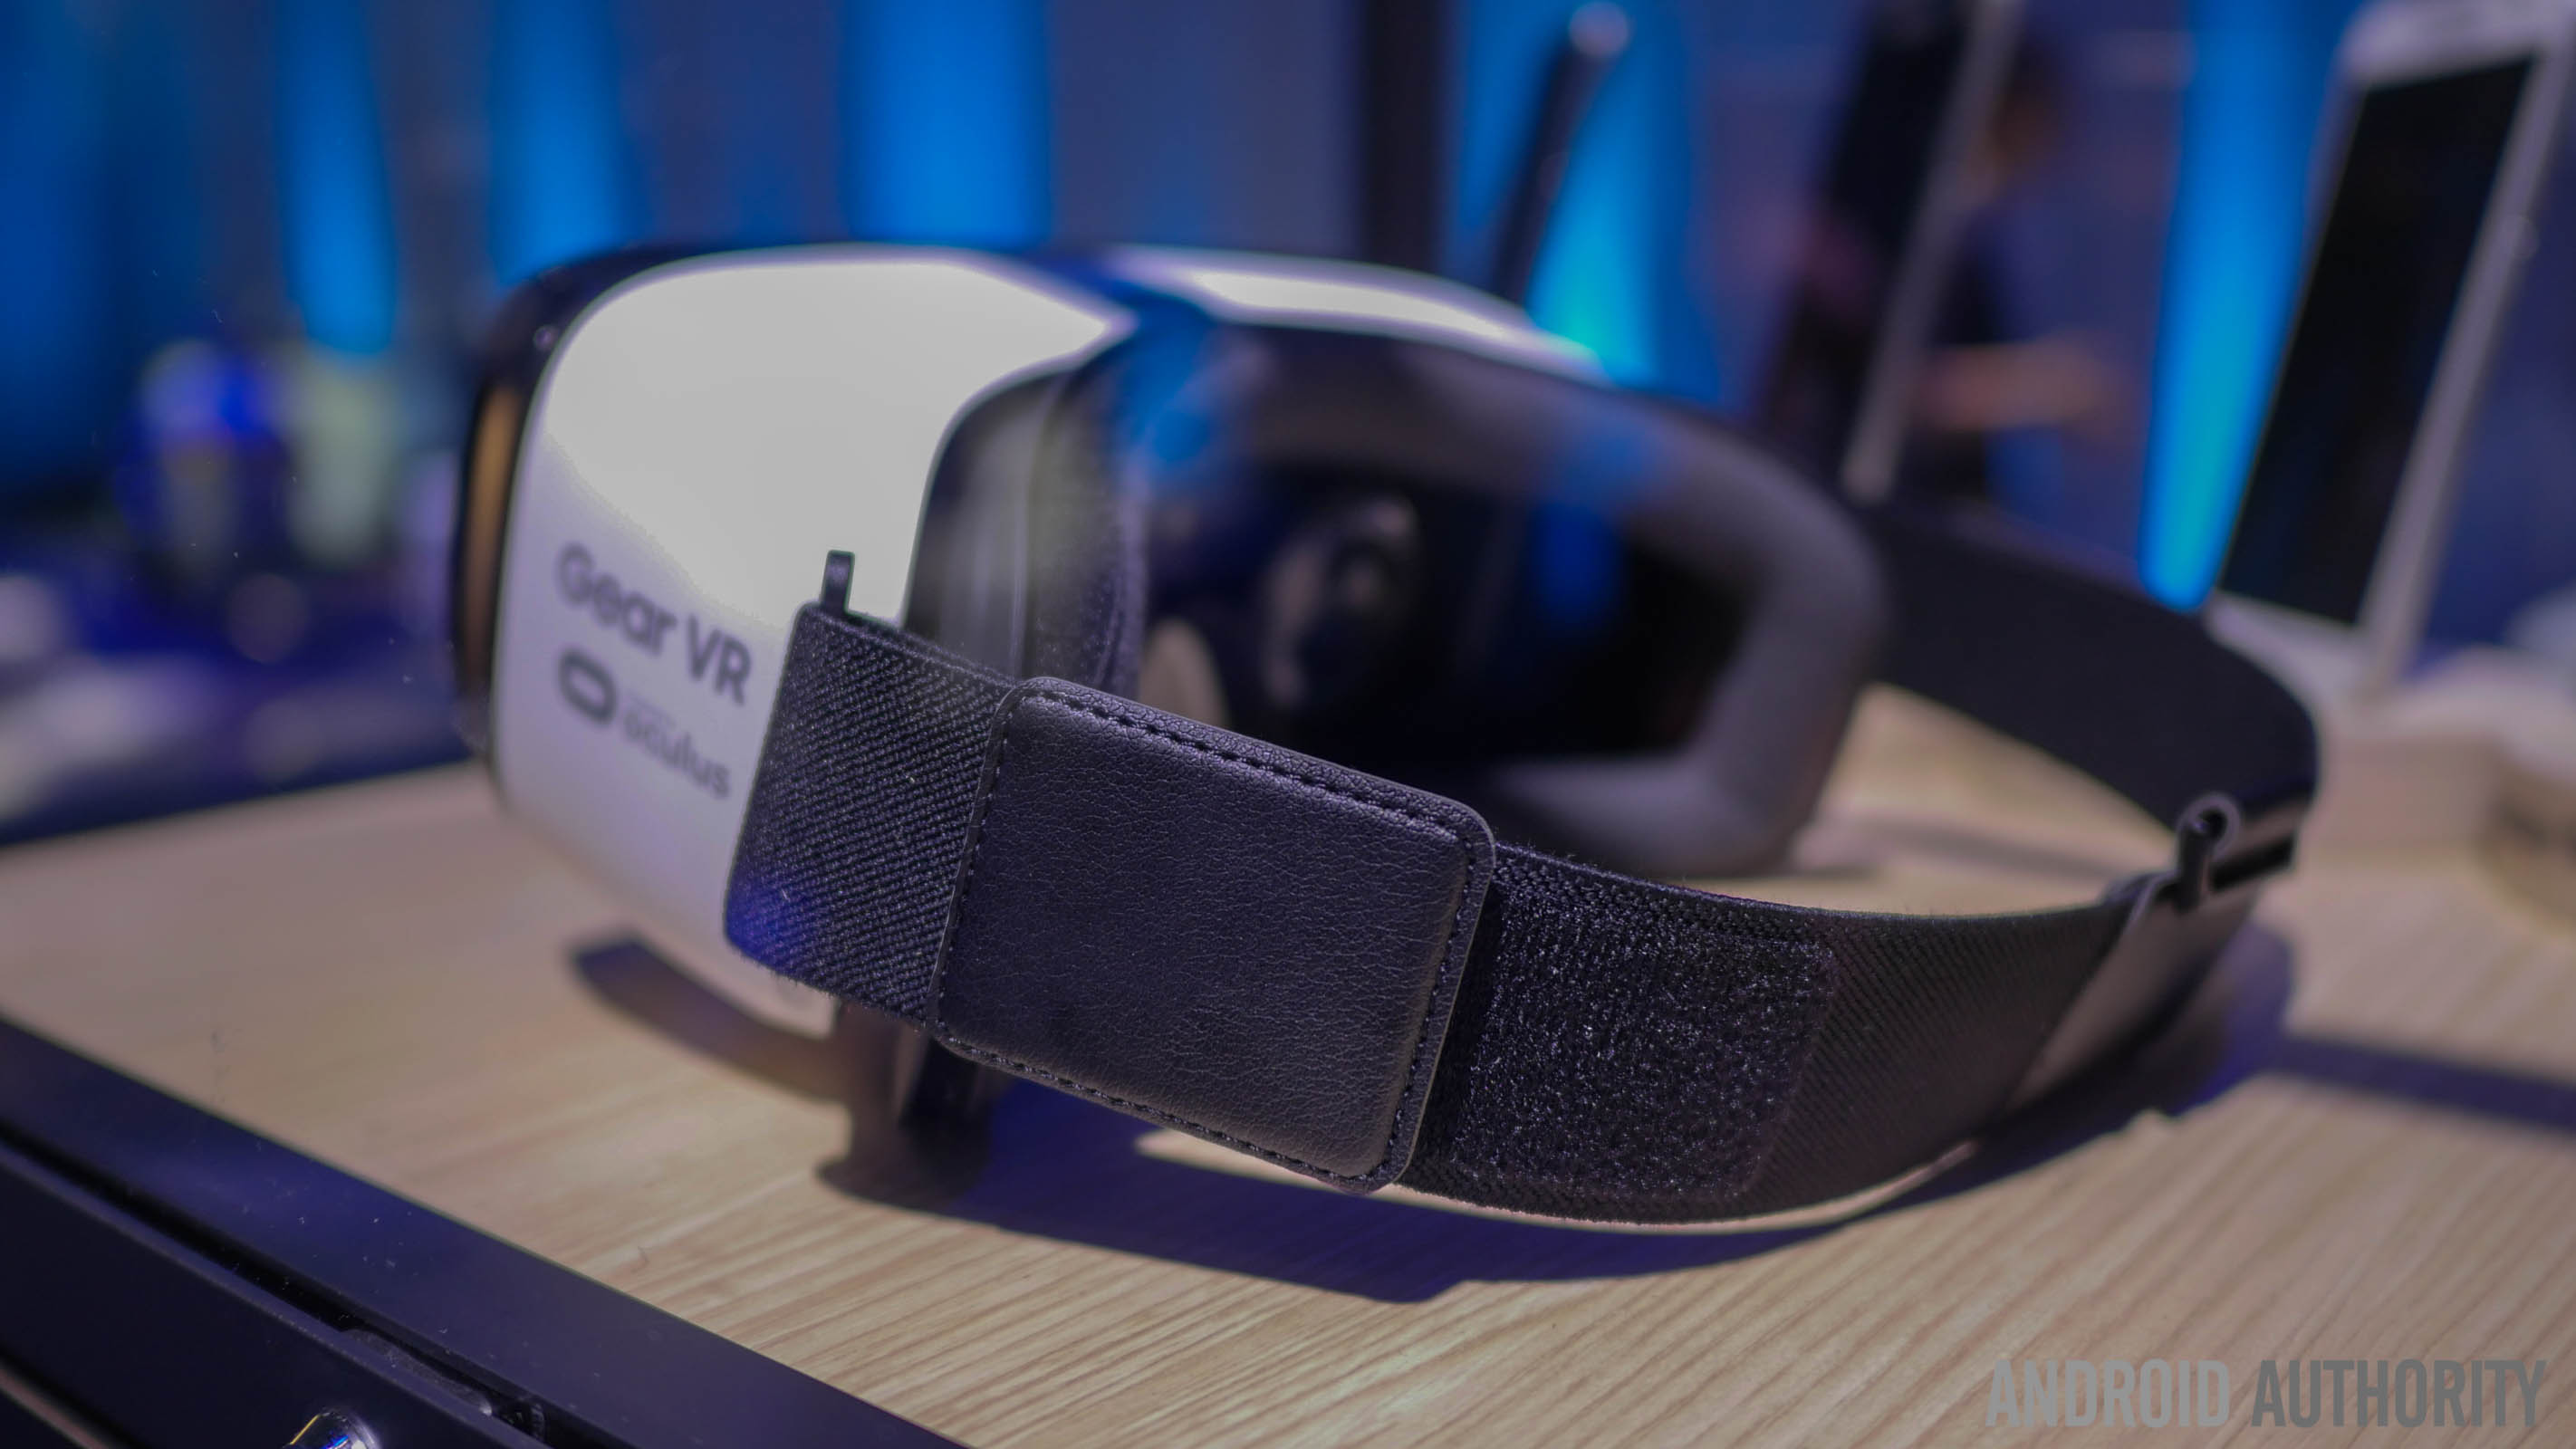 samsung gear vr oculus connect aa (3 of 15)